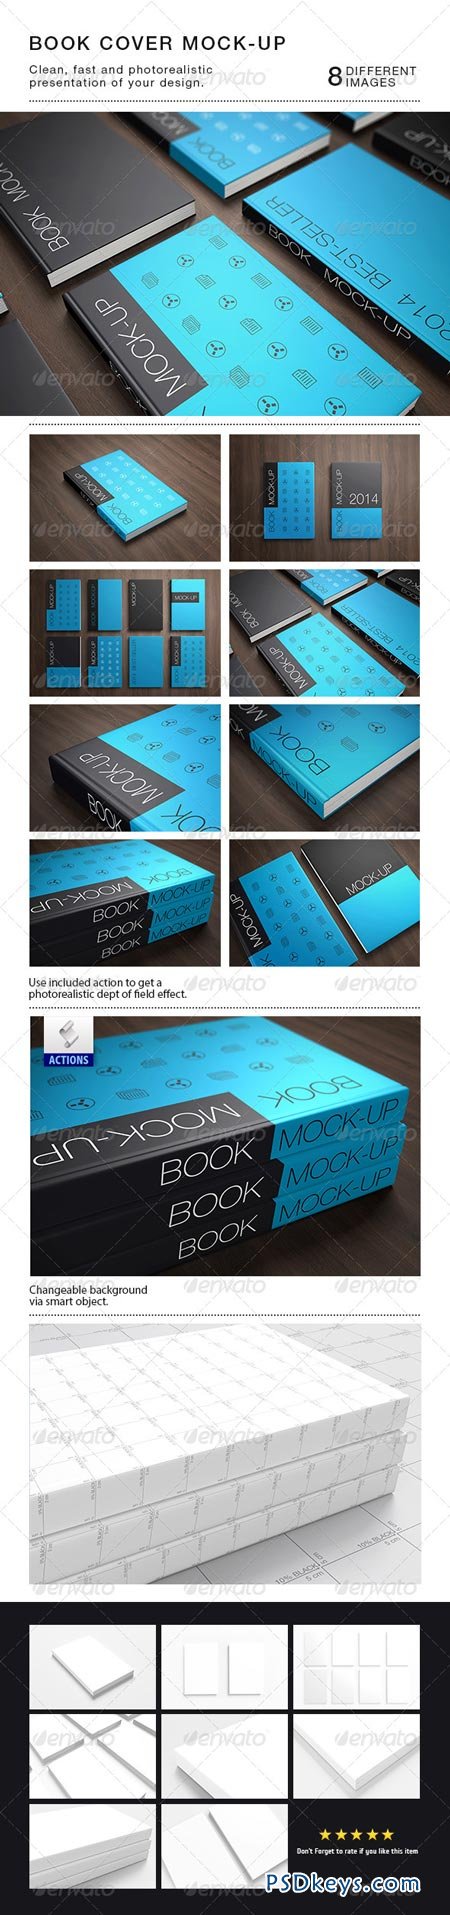 Book Cover Mock-Up's 6486875